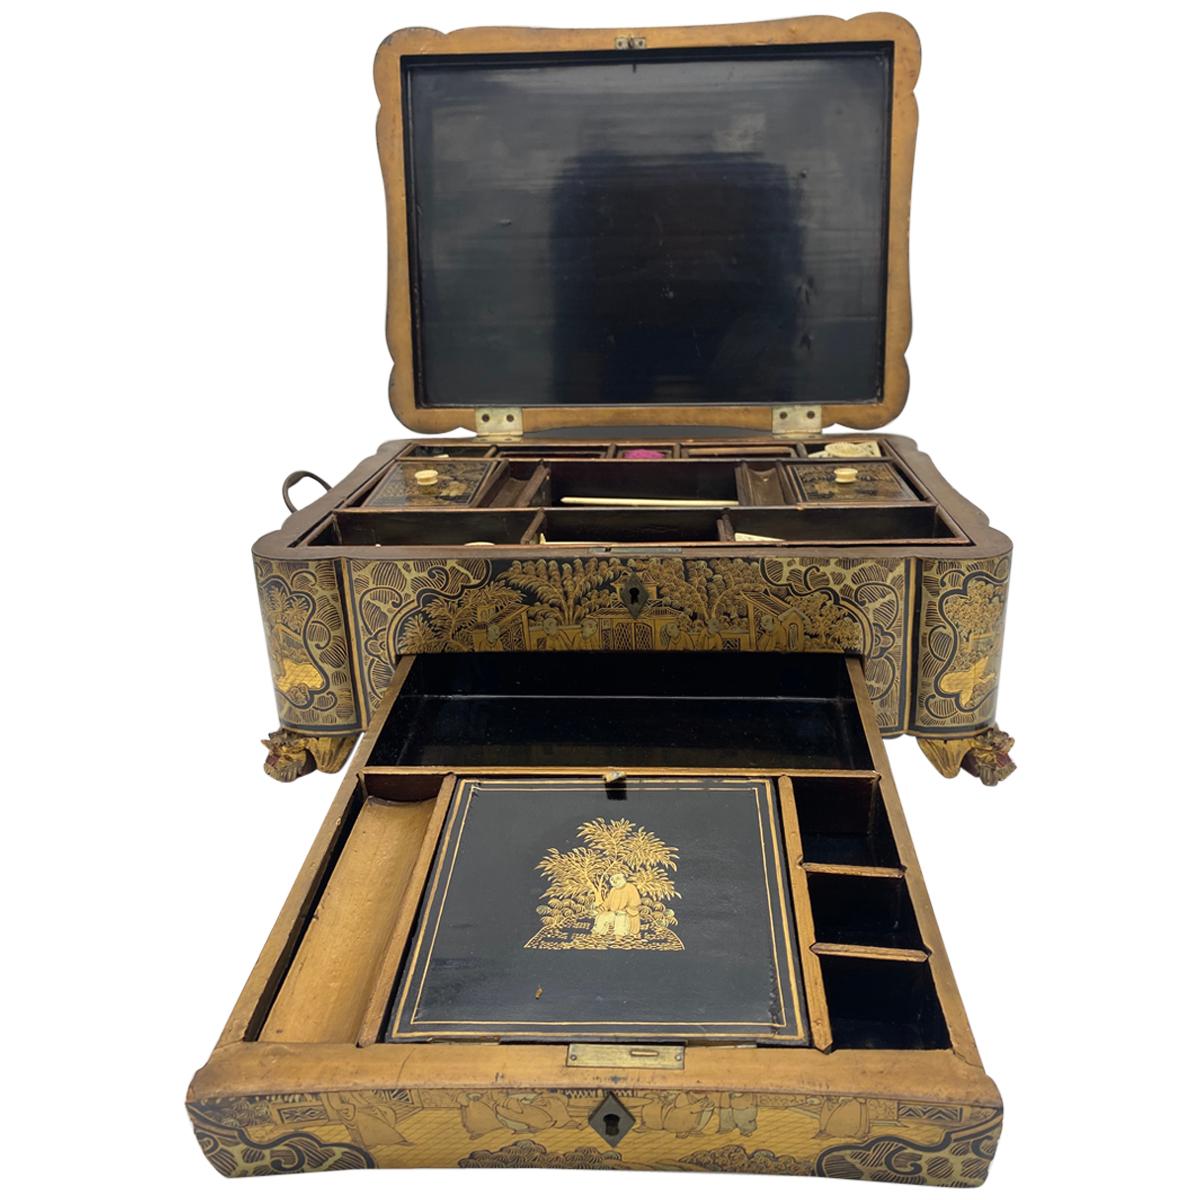 19th century Chinese lacquer sewing box from the Qing Dynasty. Decorated beautifully all over with intricate designs and images of ancient Chinese people on the top.